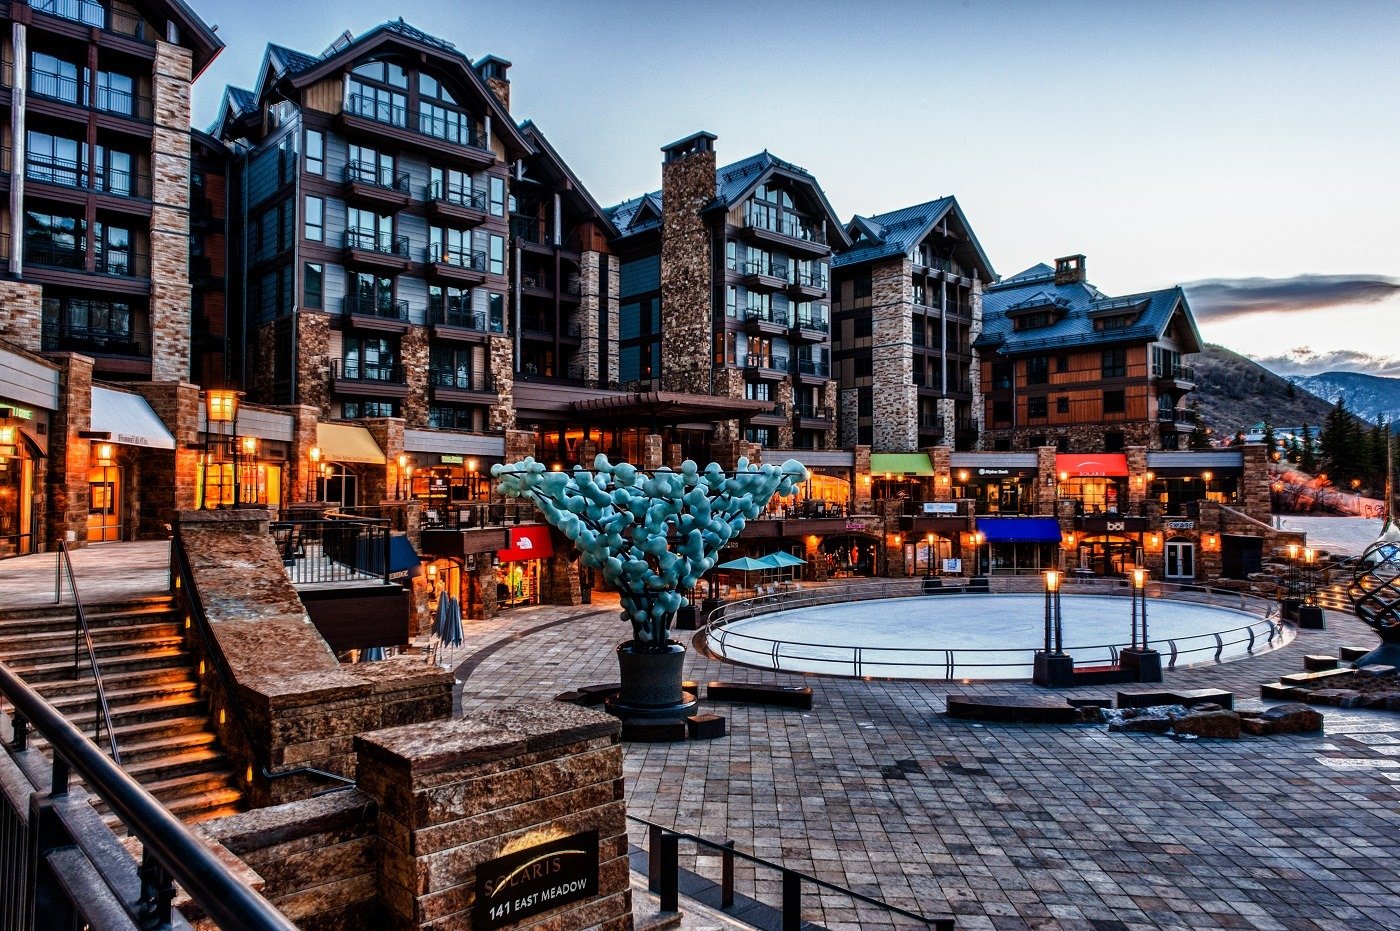 image of the Solaris Plaza Ice Skating Rink in the heart of Vail Village in the secluded morning hours